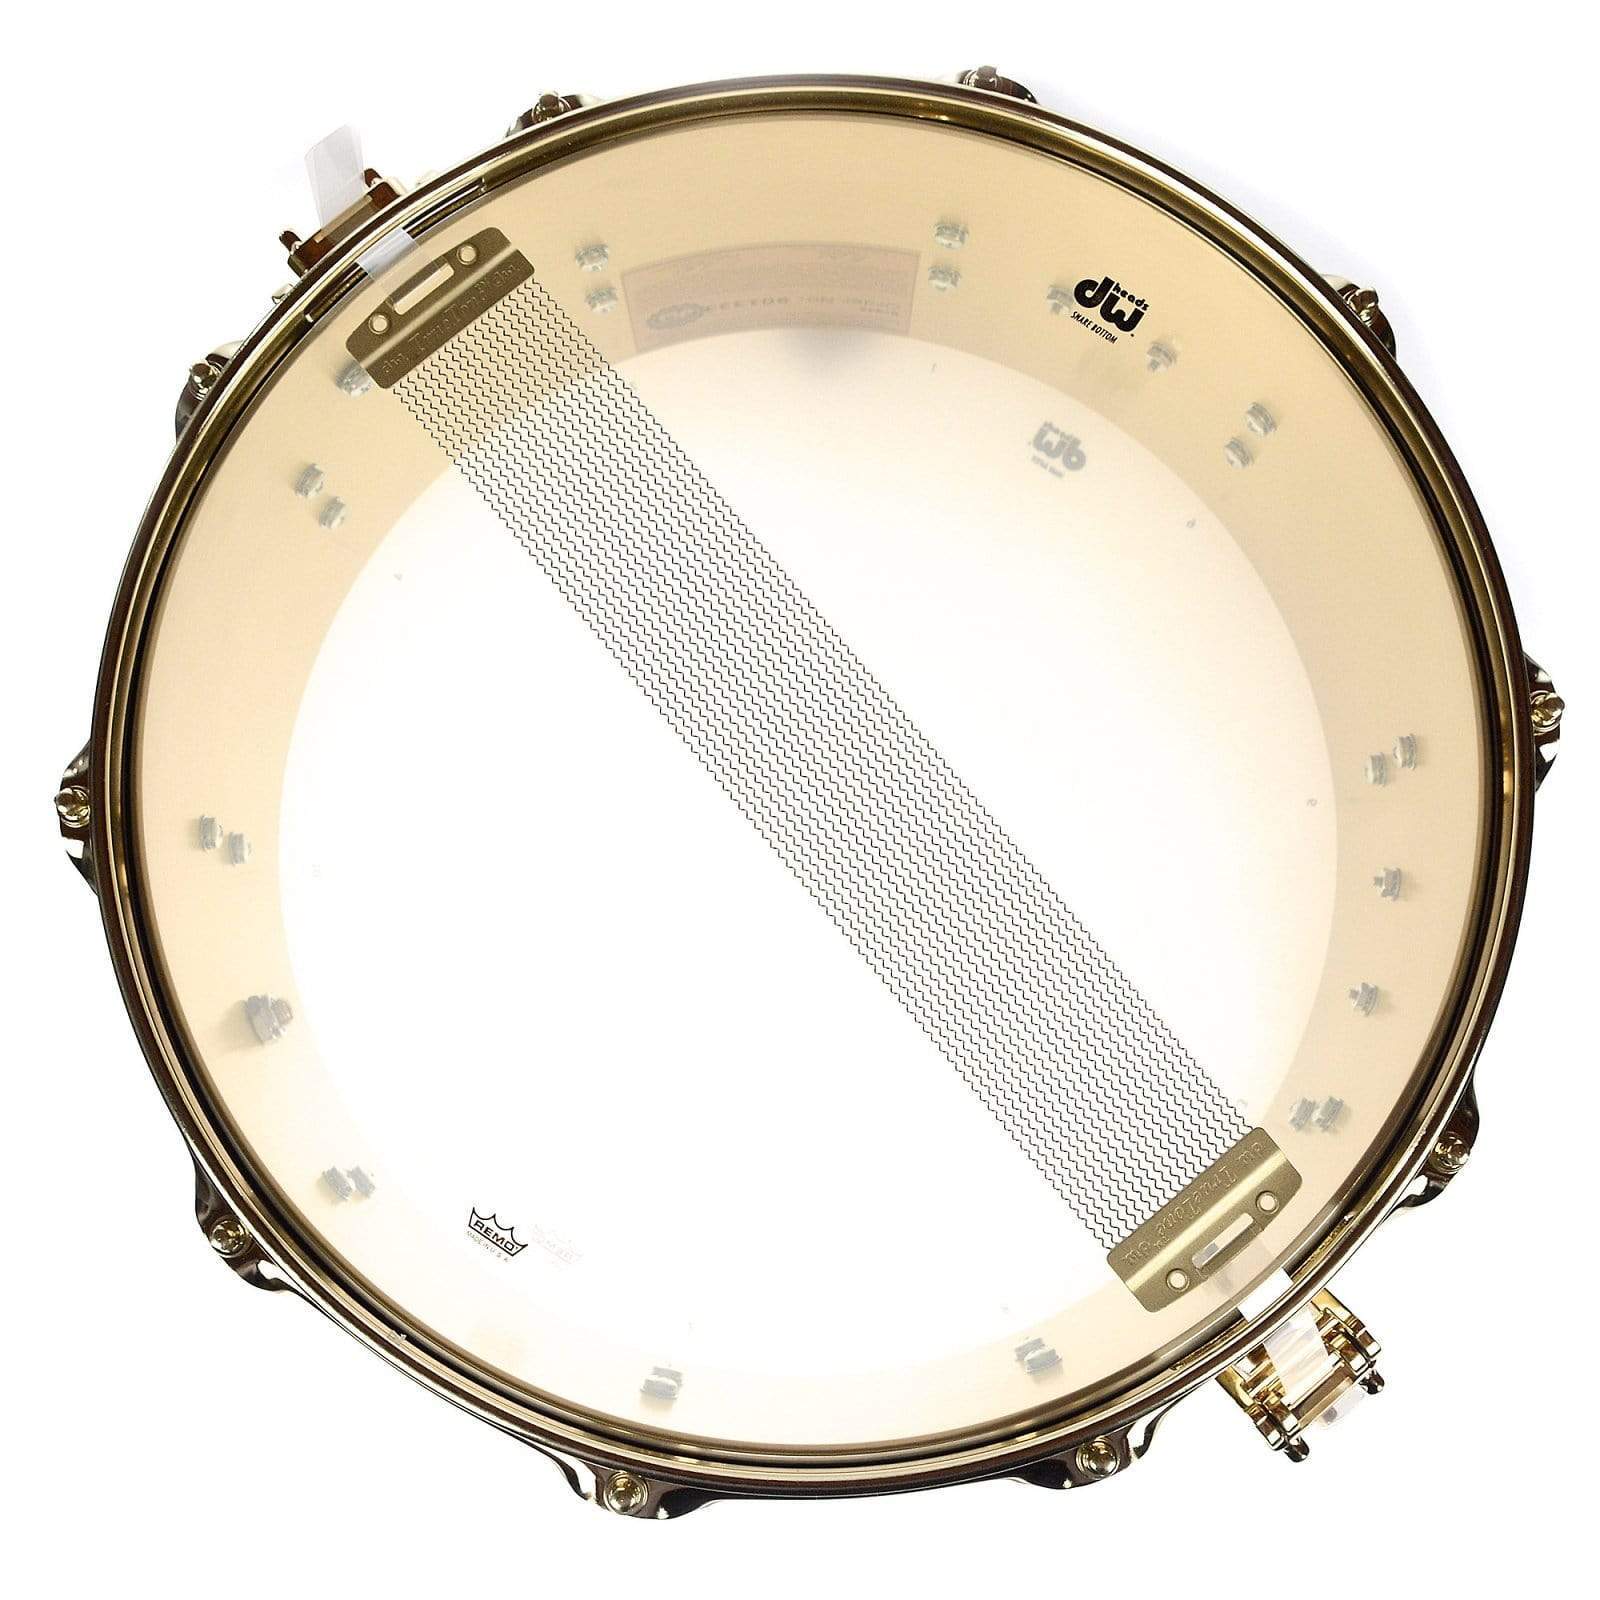 DW 6.5X14 Brass Polished Snare Drum w/ Gold Hdw Drums and Percussion / Acoustic Drums / Snare